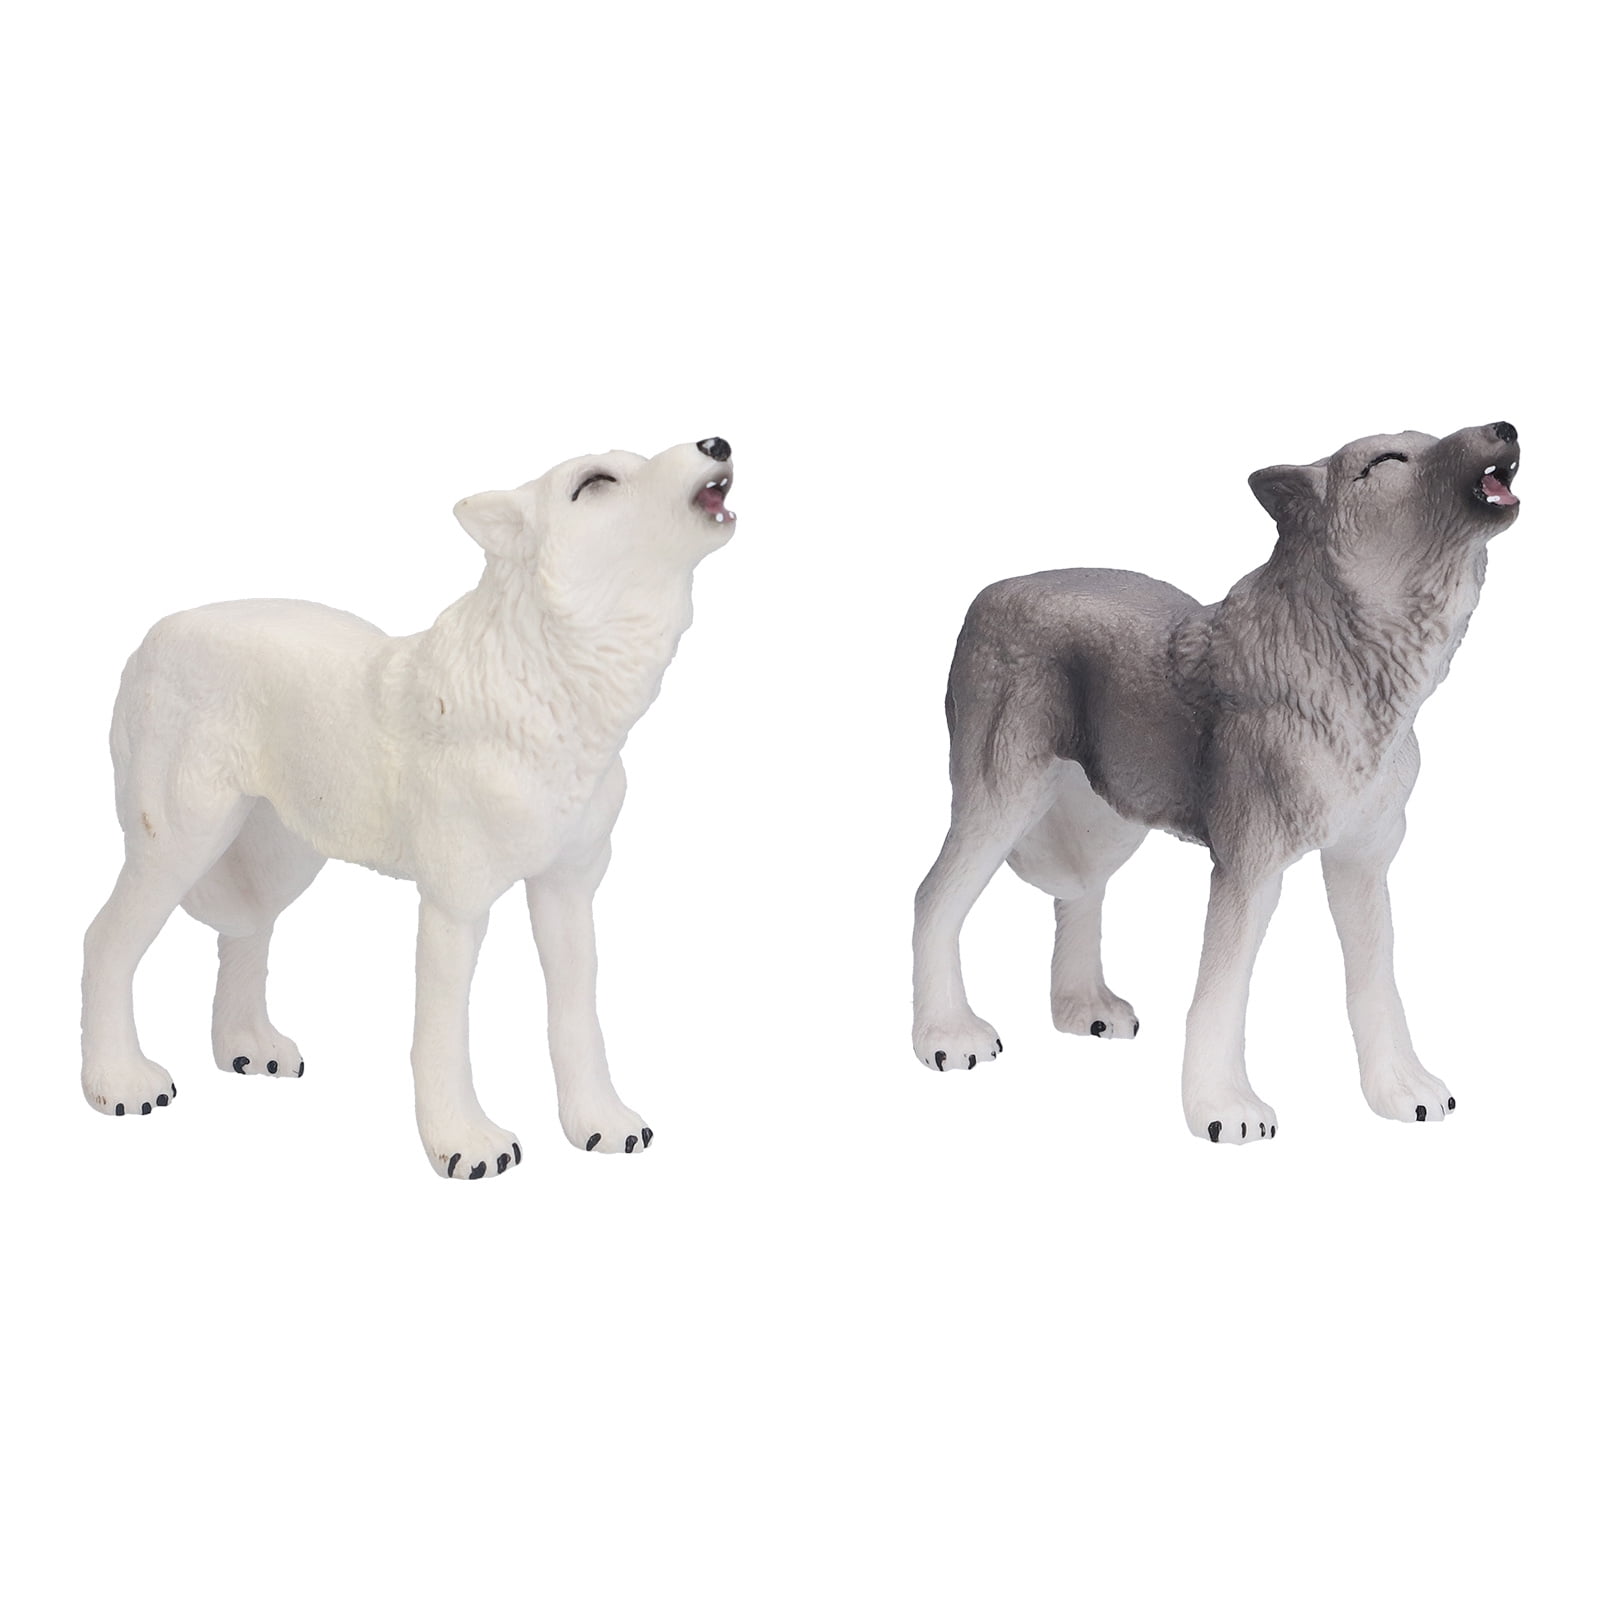 Howling Wolf Model Toys Action Figure Accessories Animal Figurines Toy 